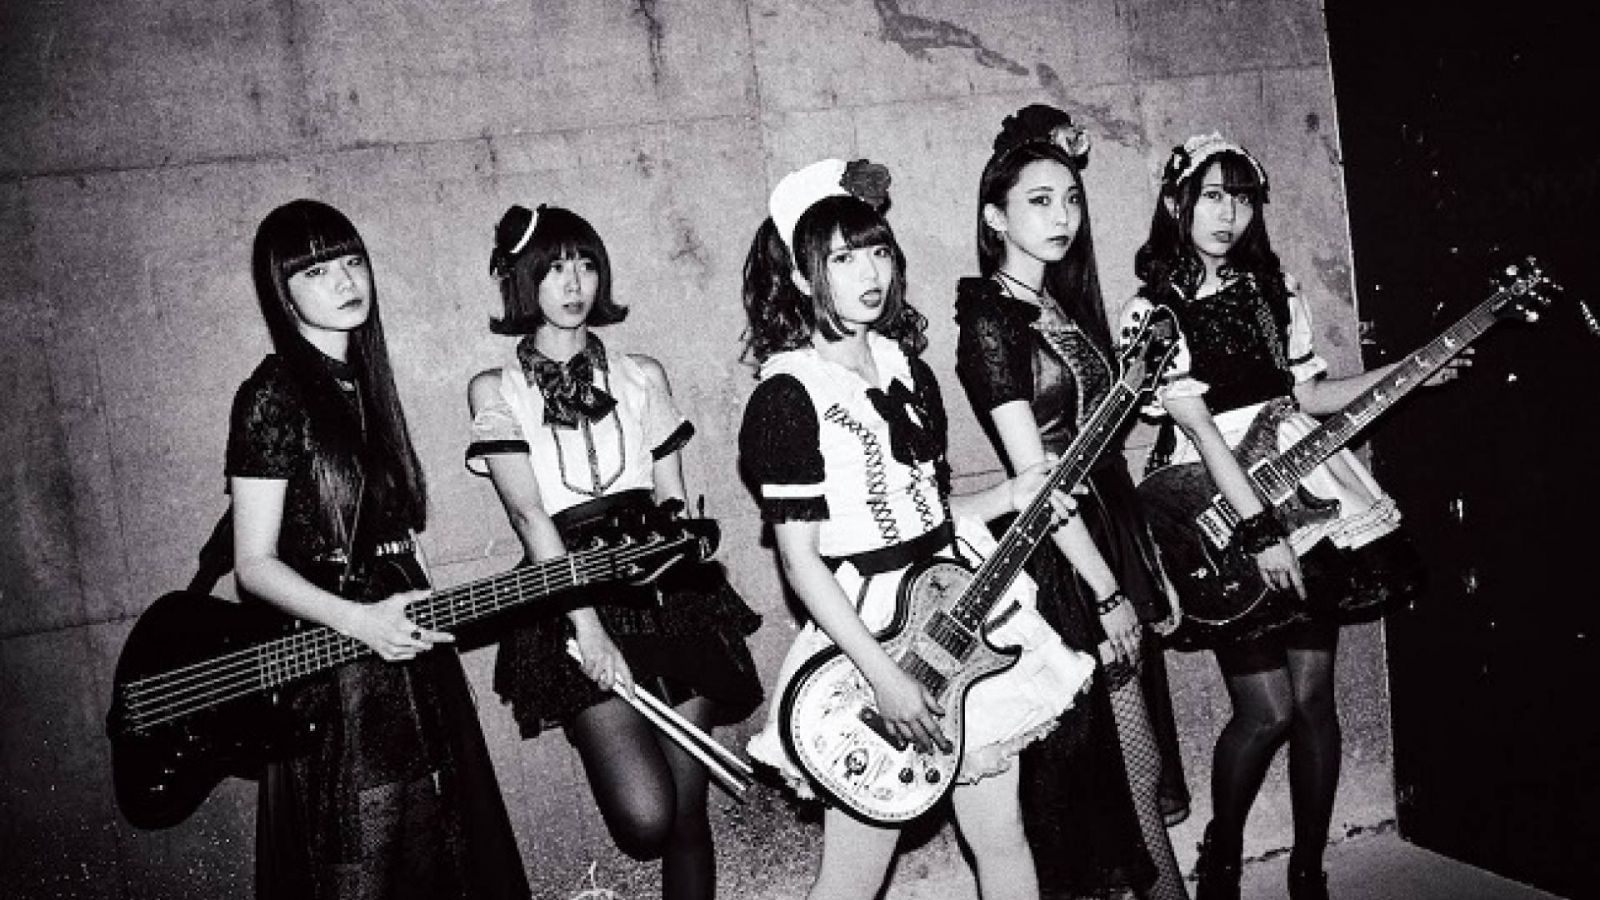 BAND-MAID Announce World Tour © PLATINUM PASSPORT. All Rights Reserved.